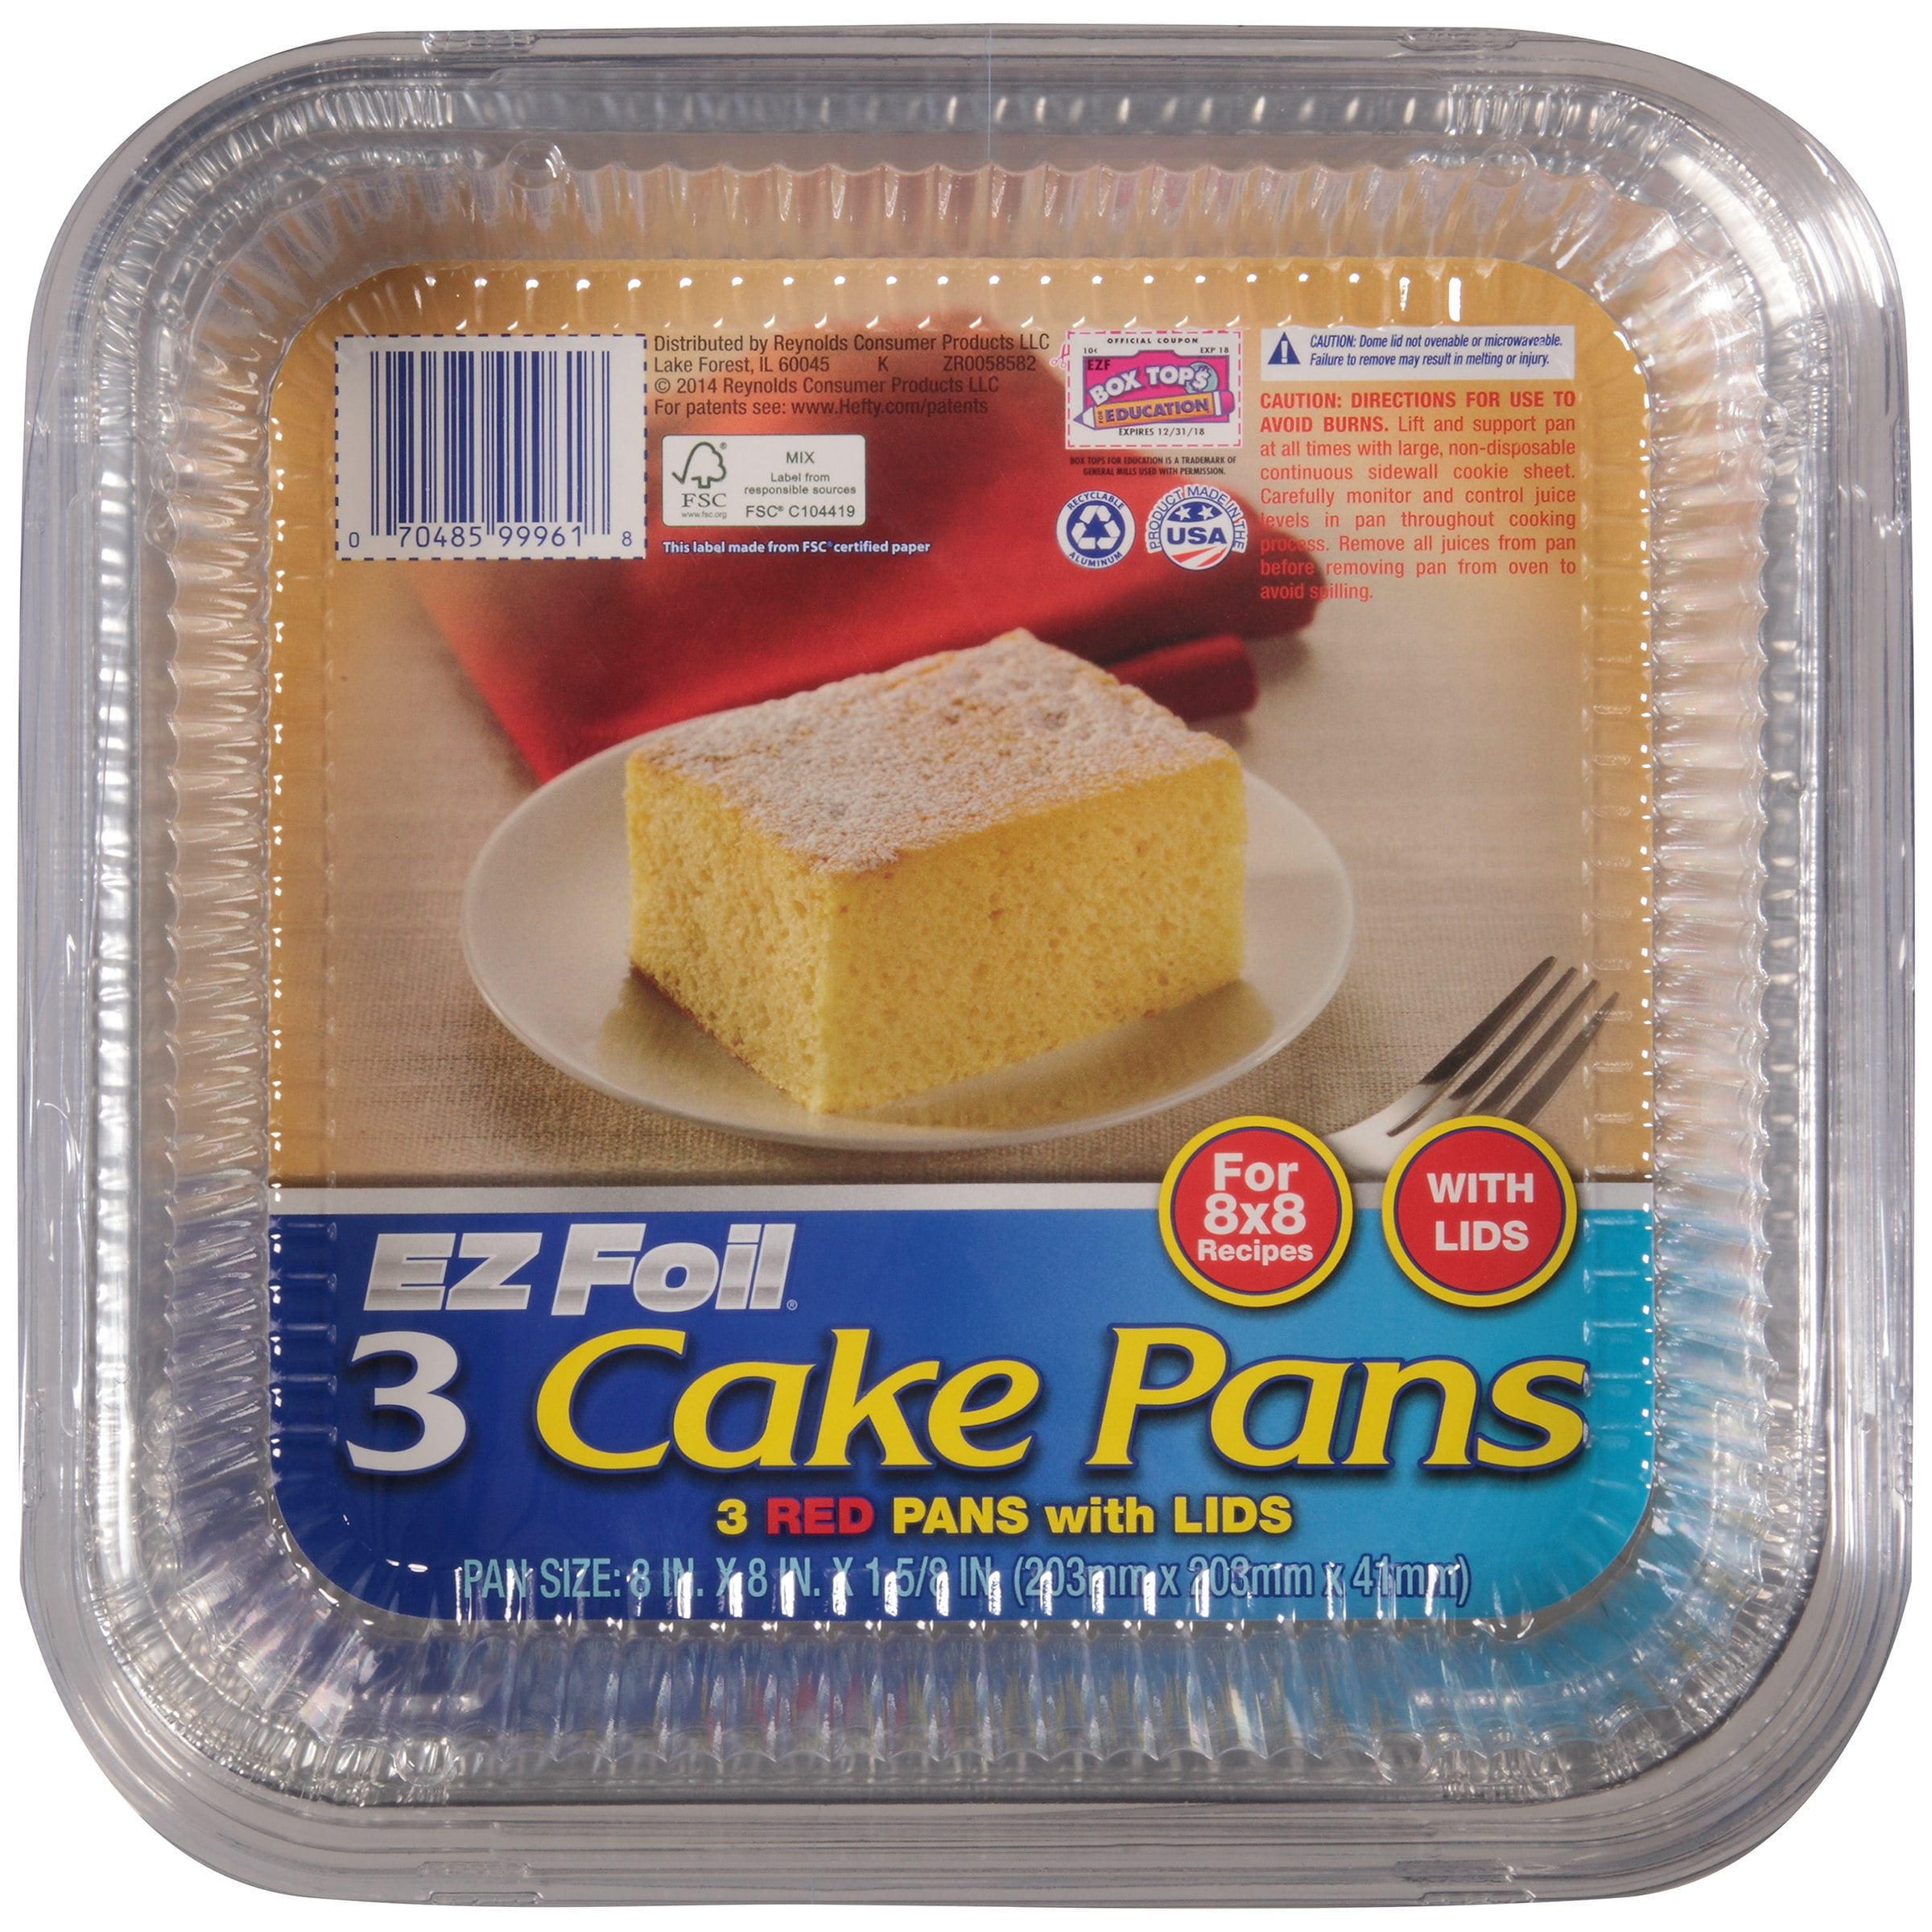 EZ Foil Cake Pans with Lids, Red, 13 x 9 inch, 2 Count 